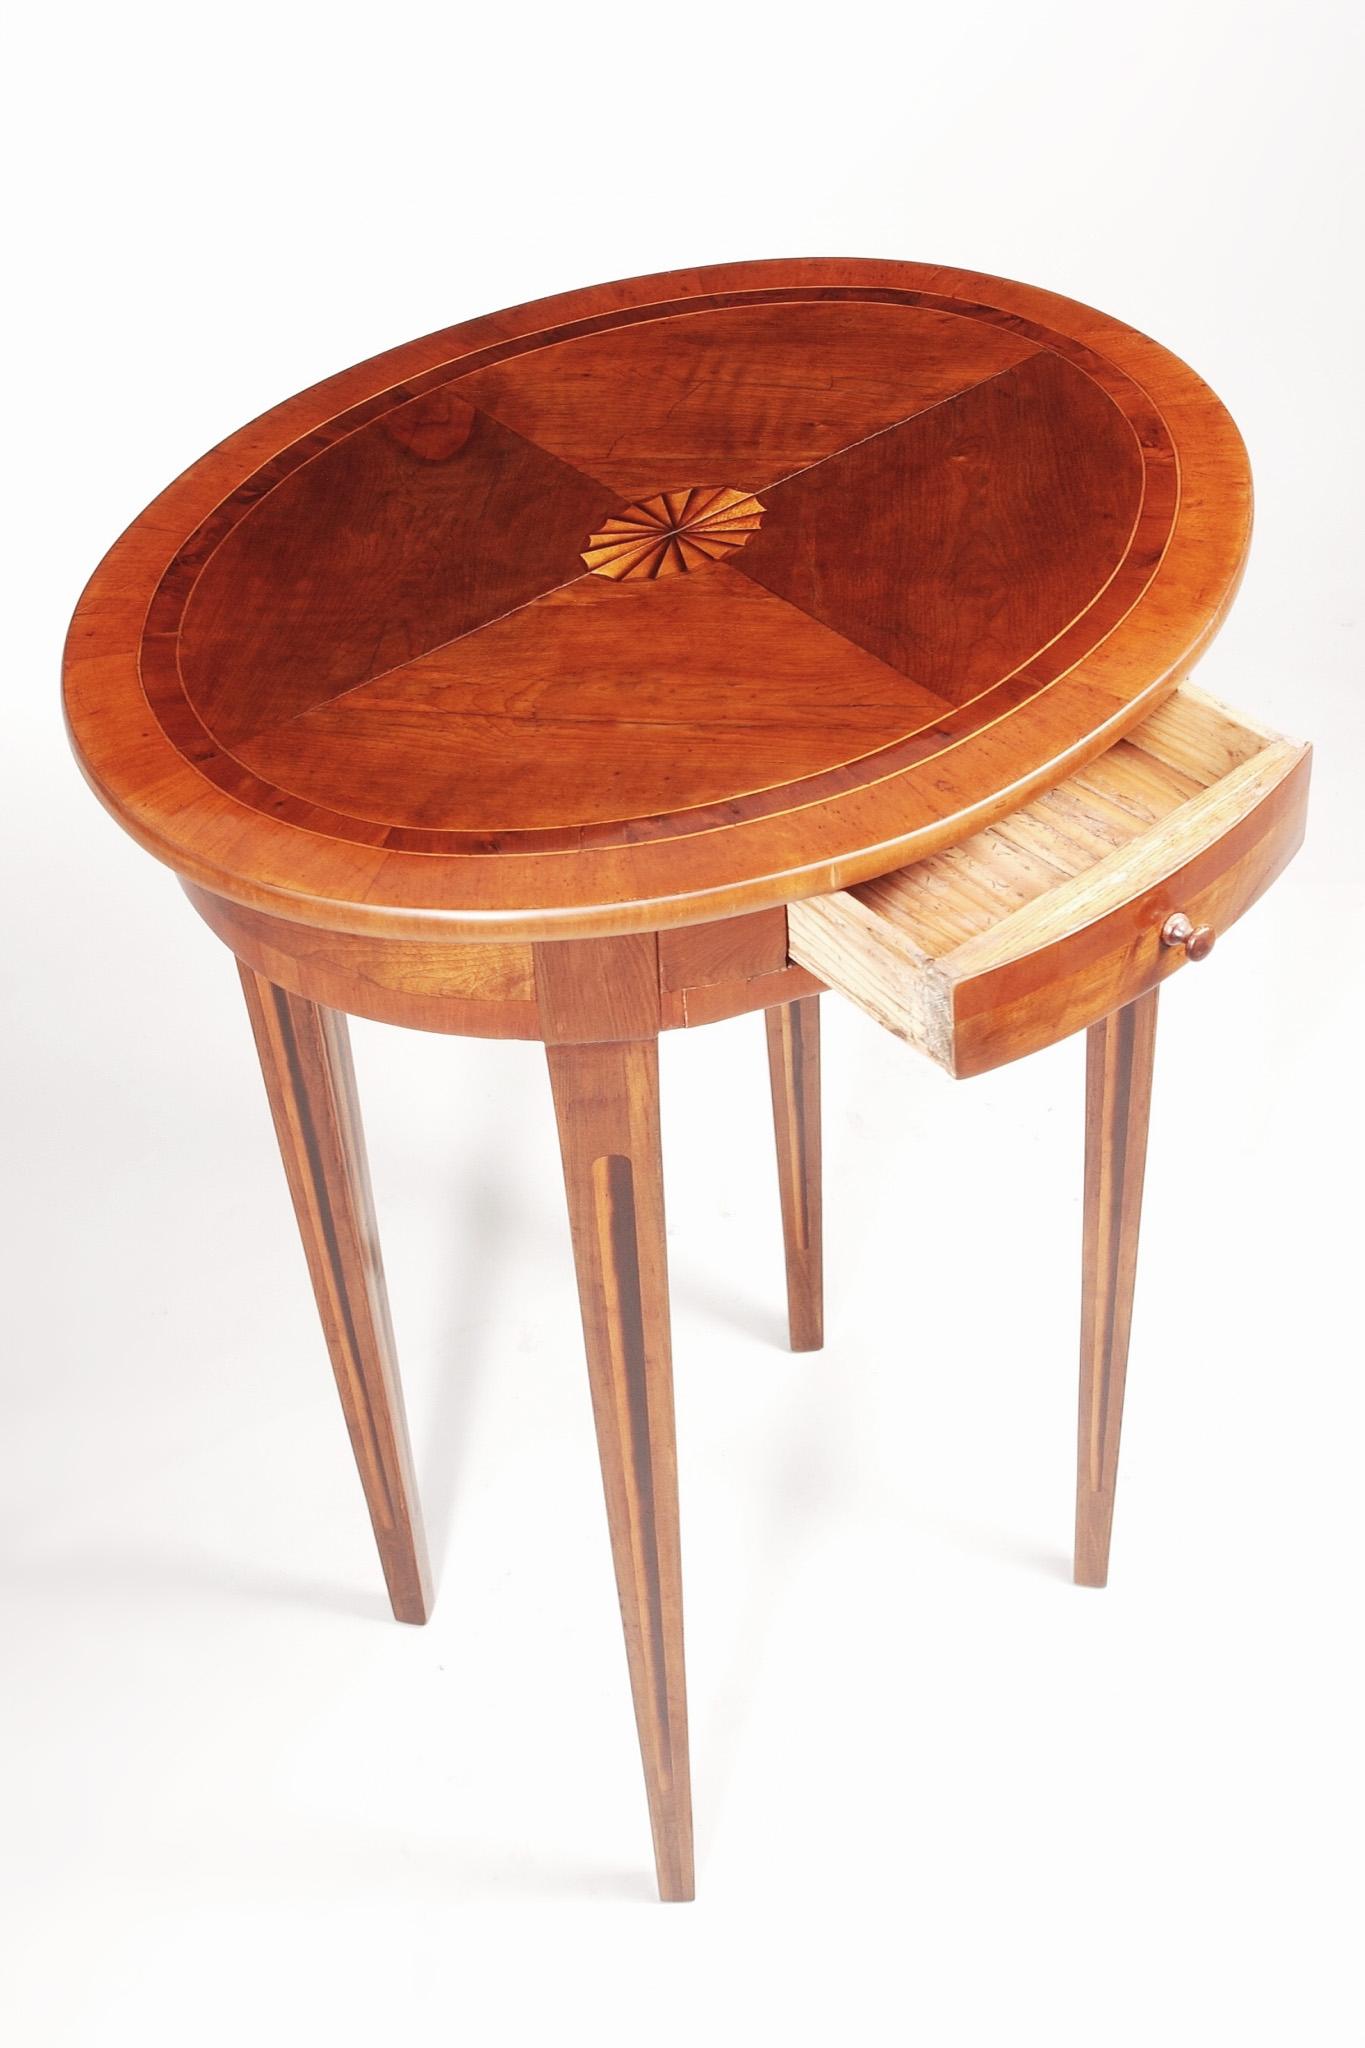 Czech classicism Biedermeier small table.
Period: 1810-1819
Material: Yew tree
Shellac polished.